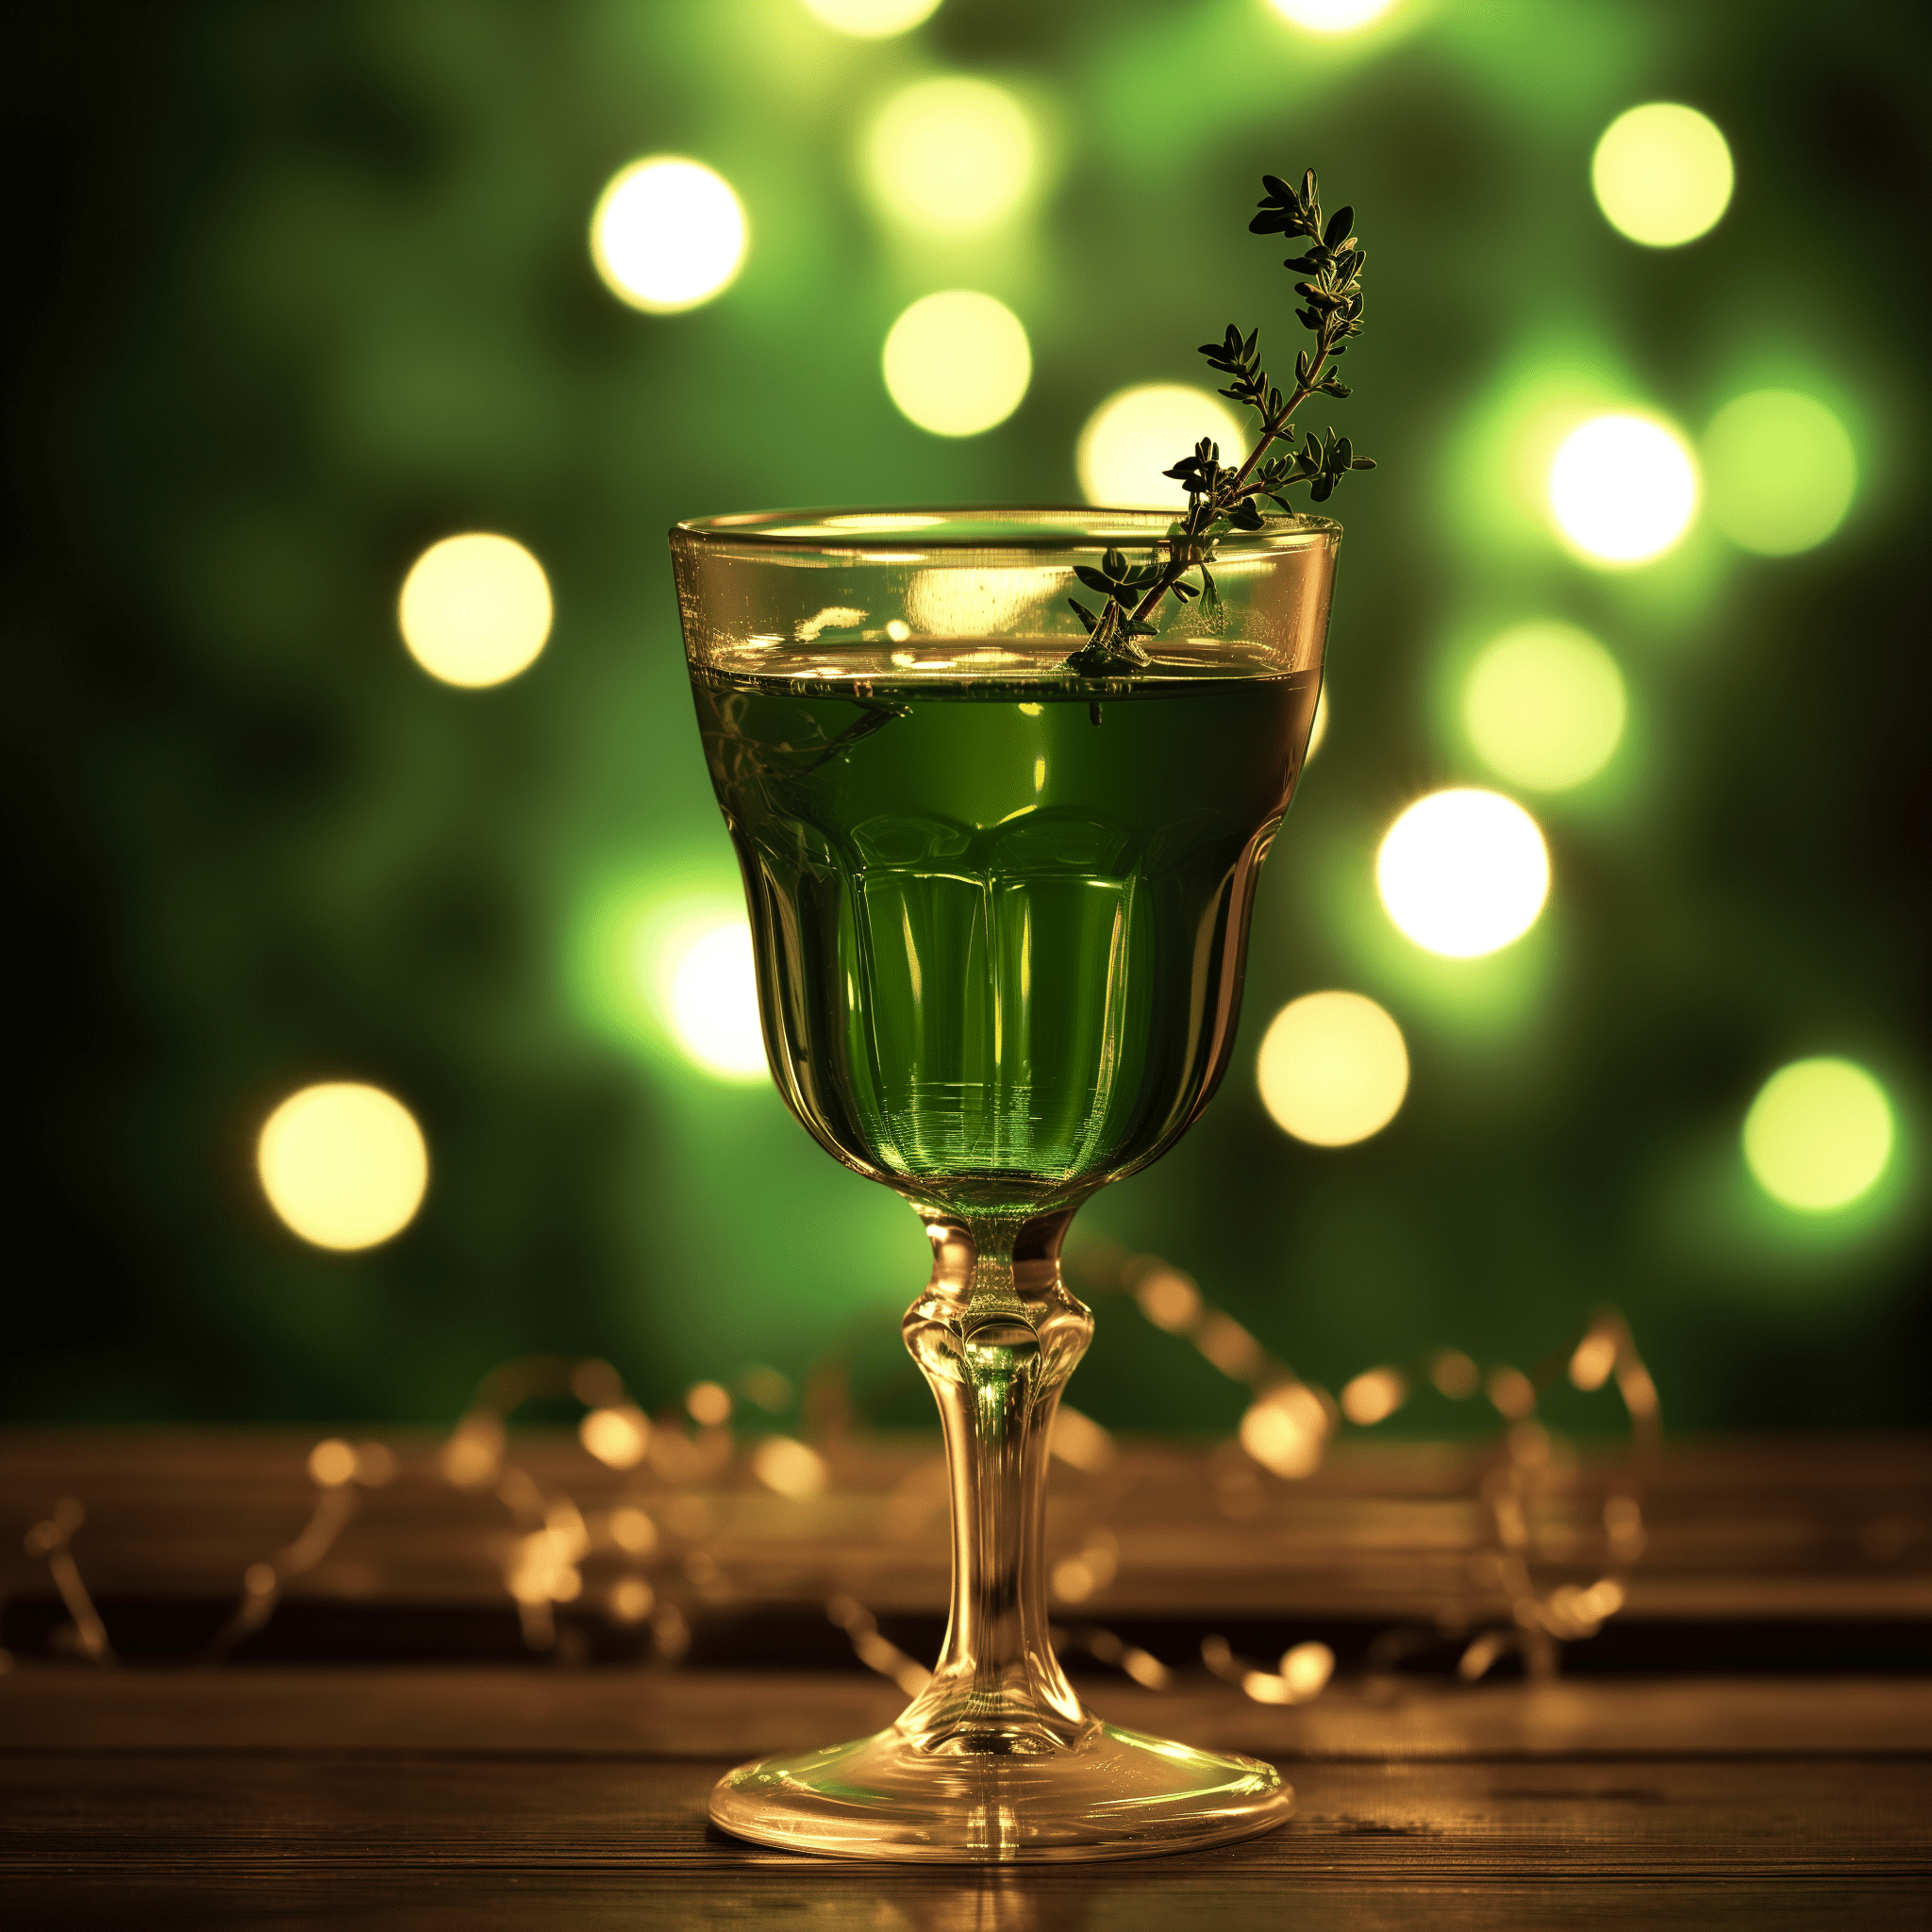 Absinthe Drip Cocktail Recipe - The Absinthe Drip is a complex, herbaceous cocktail with a strong anise flavor that is both sweet and bitter. The water dilutes the absinthe, making it a smooth, refreshing drink with a potent kick.